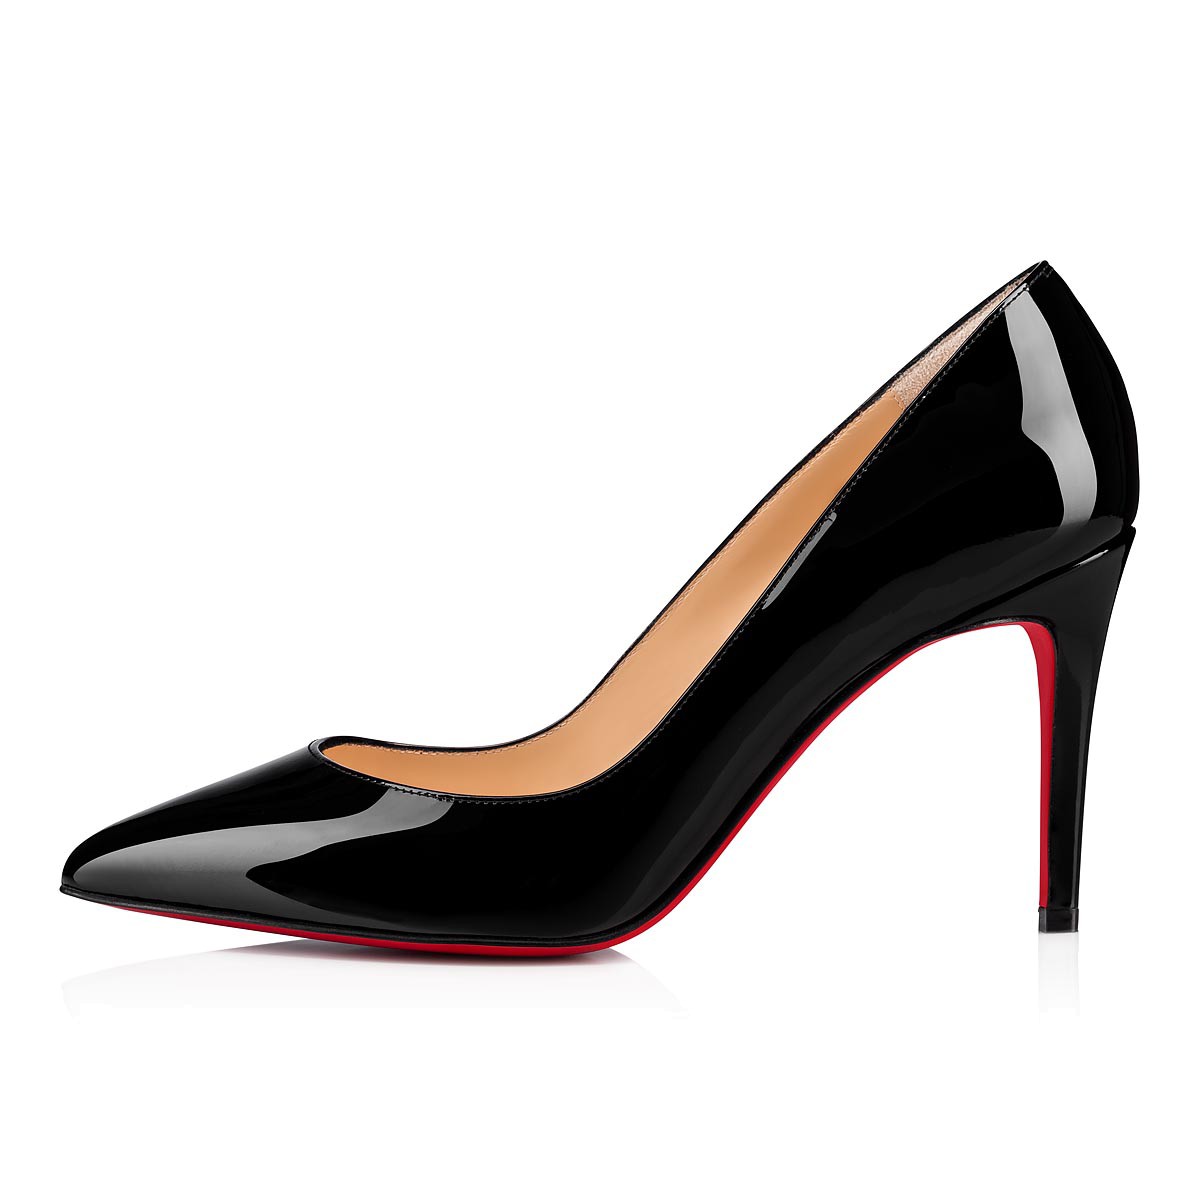 Christian Louboutin Women Shoes Pigalle 85 mm Heel Height-Black